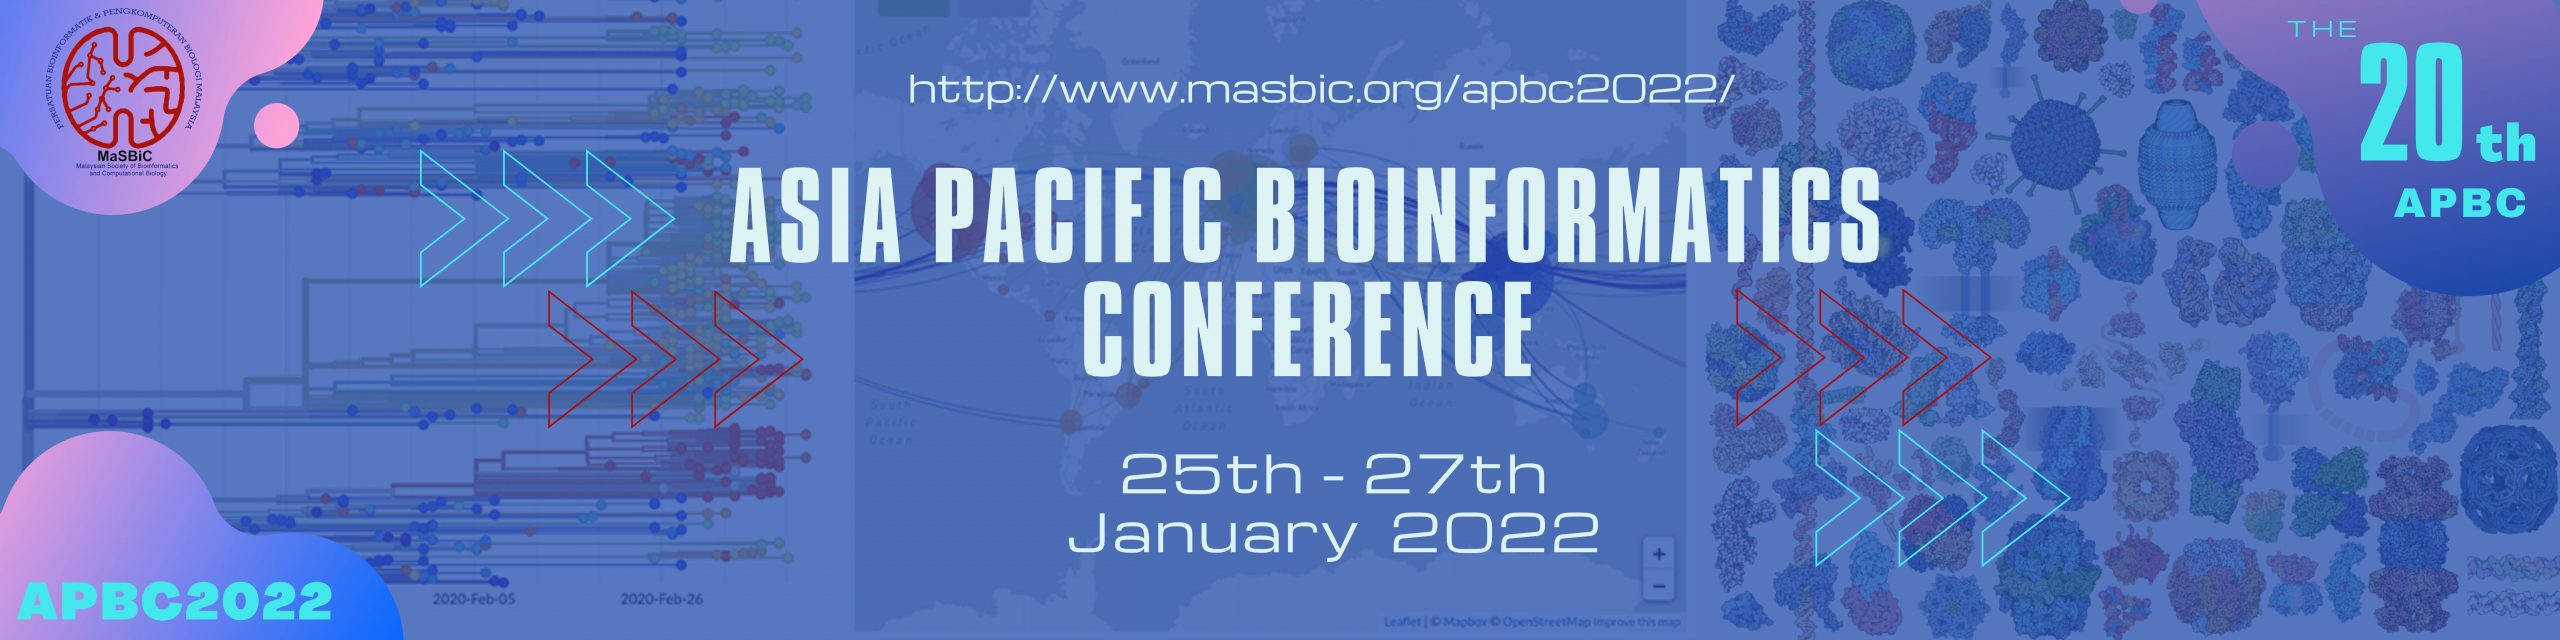 ASIA PACIFIC BIOINFORMATICS CONFERENCE 2022 ONLINE 1.251.27生物信息学湖南省